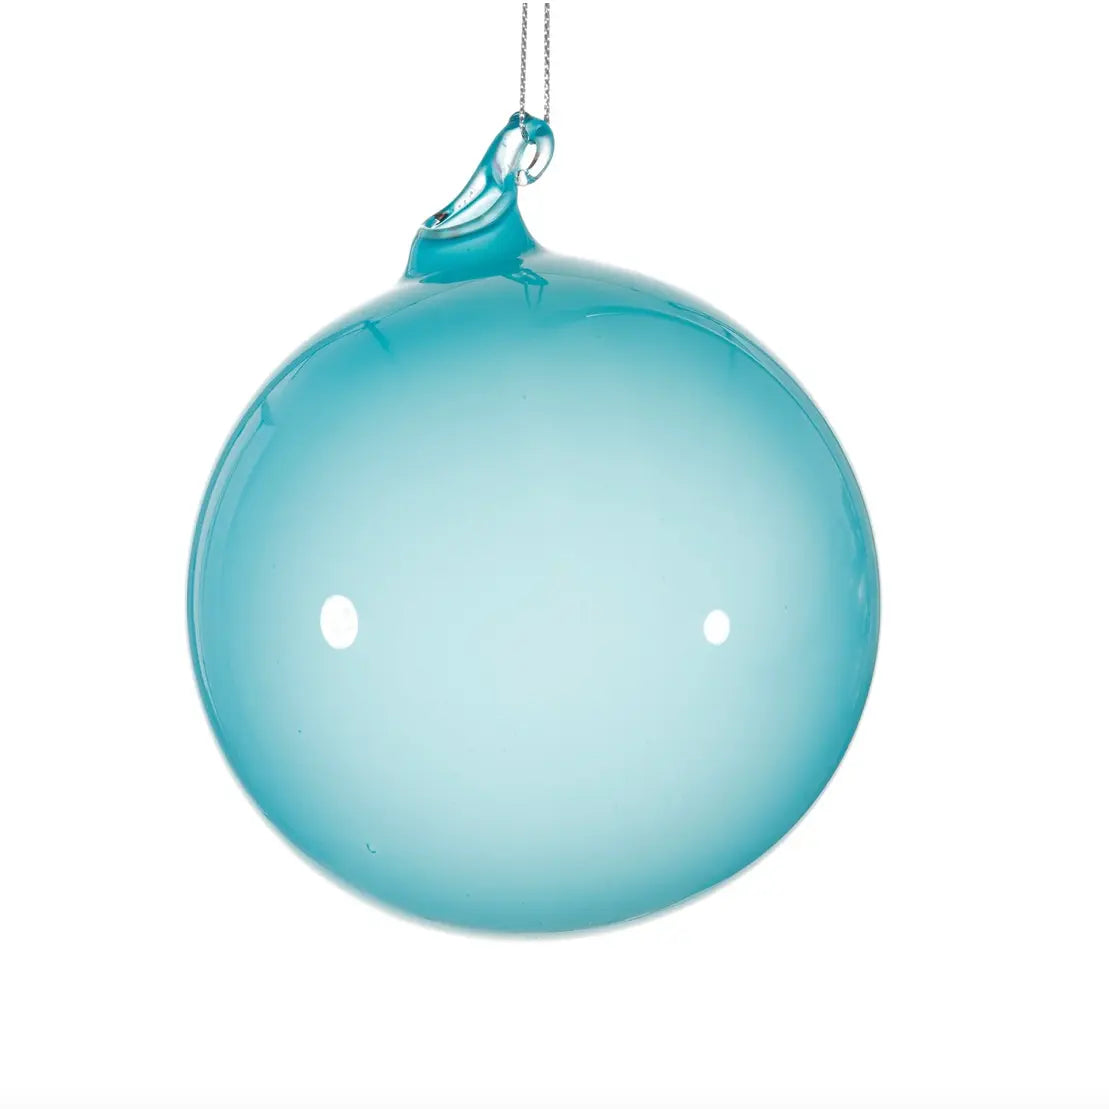 Home Smith Jim Marvin Bubblegum Glass Ornaments in Light Turquoise Winward Holiday Ornaments